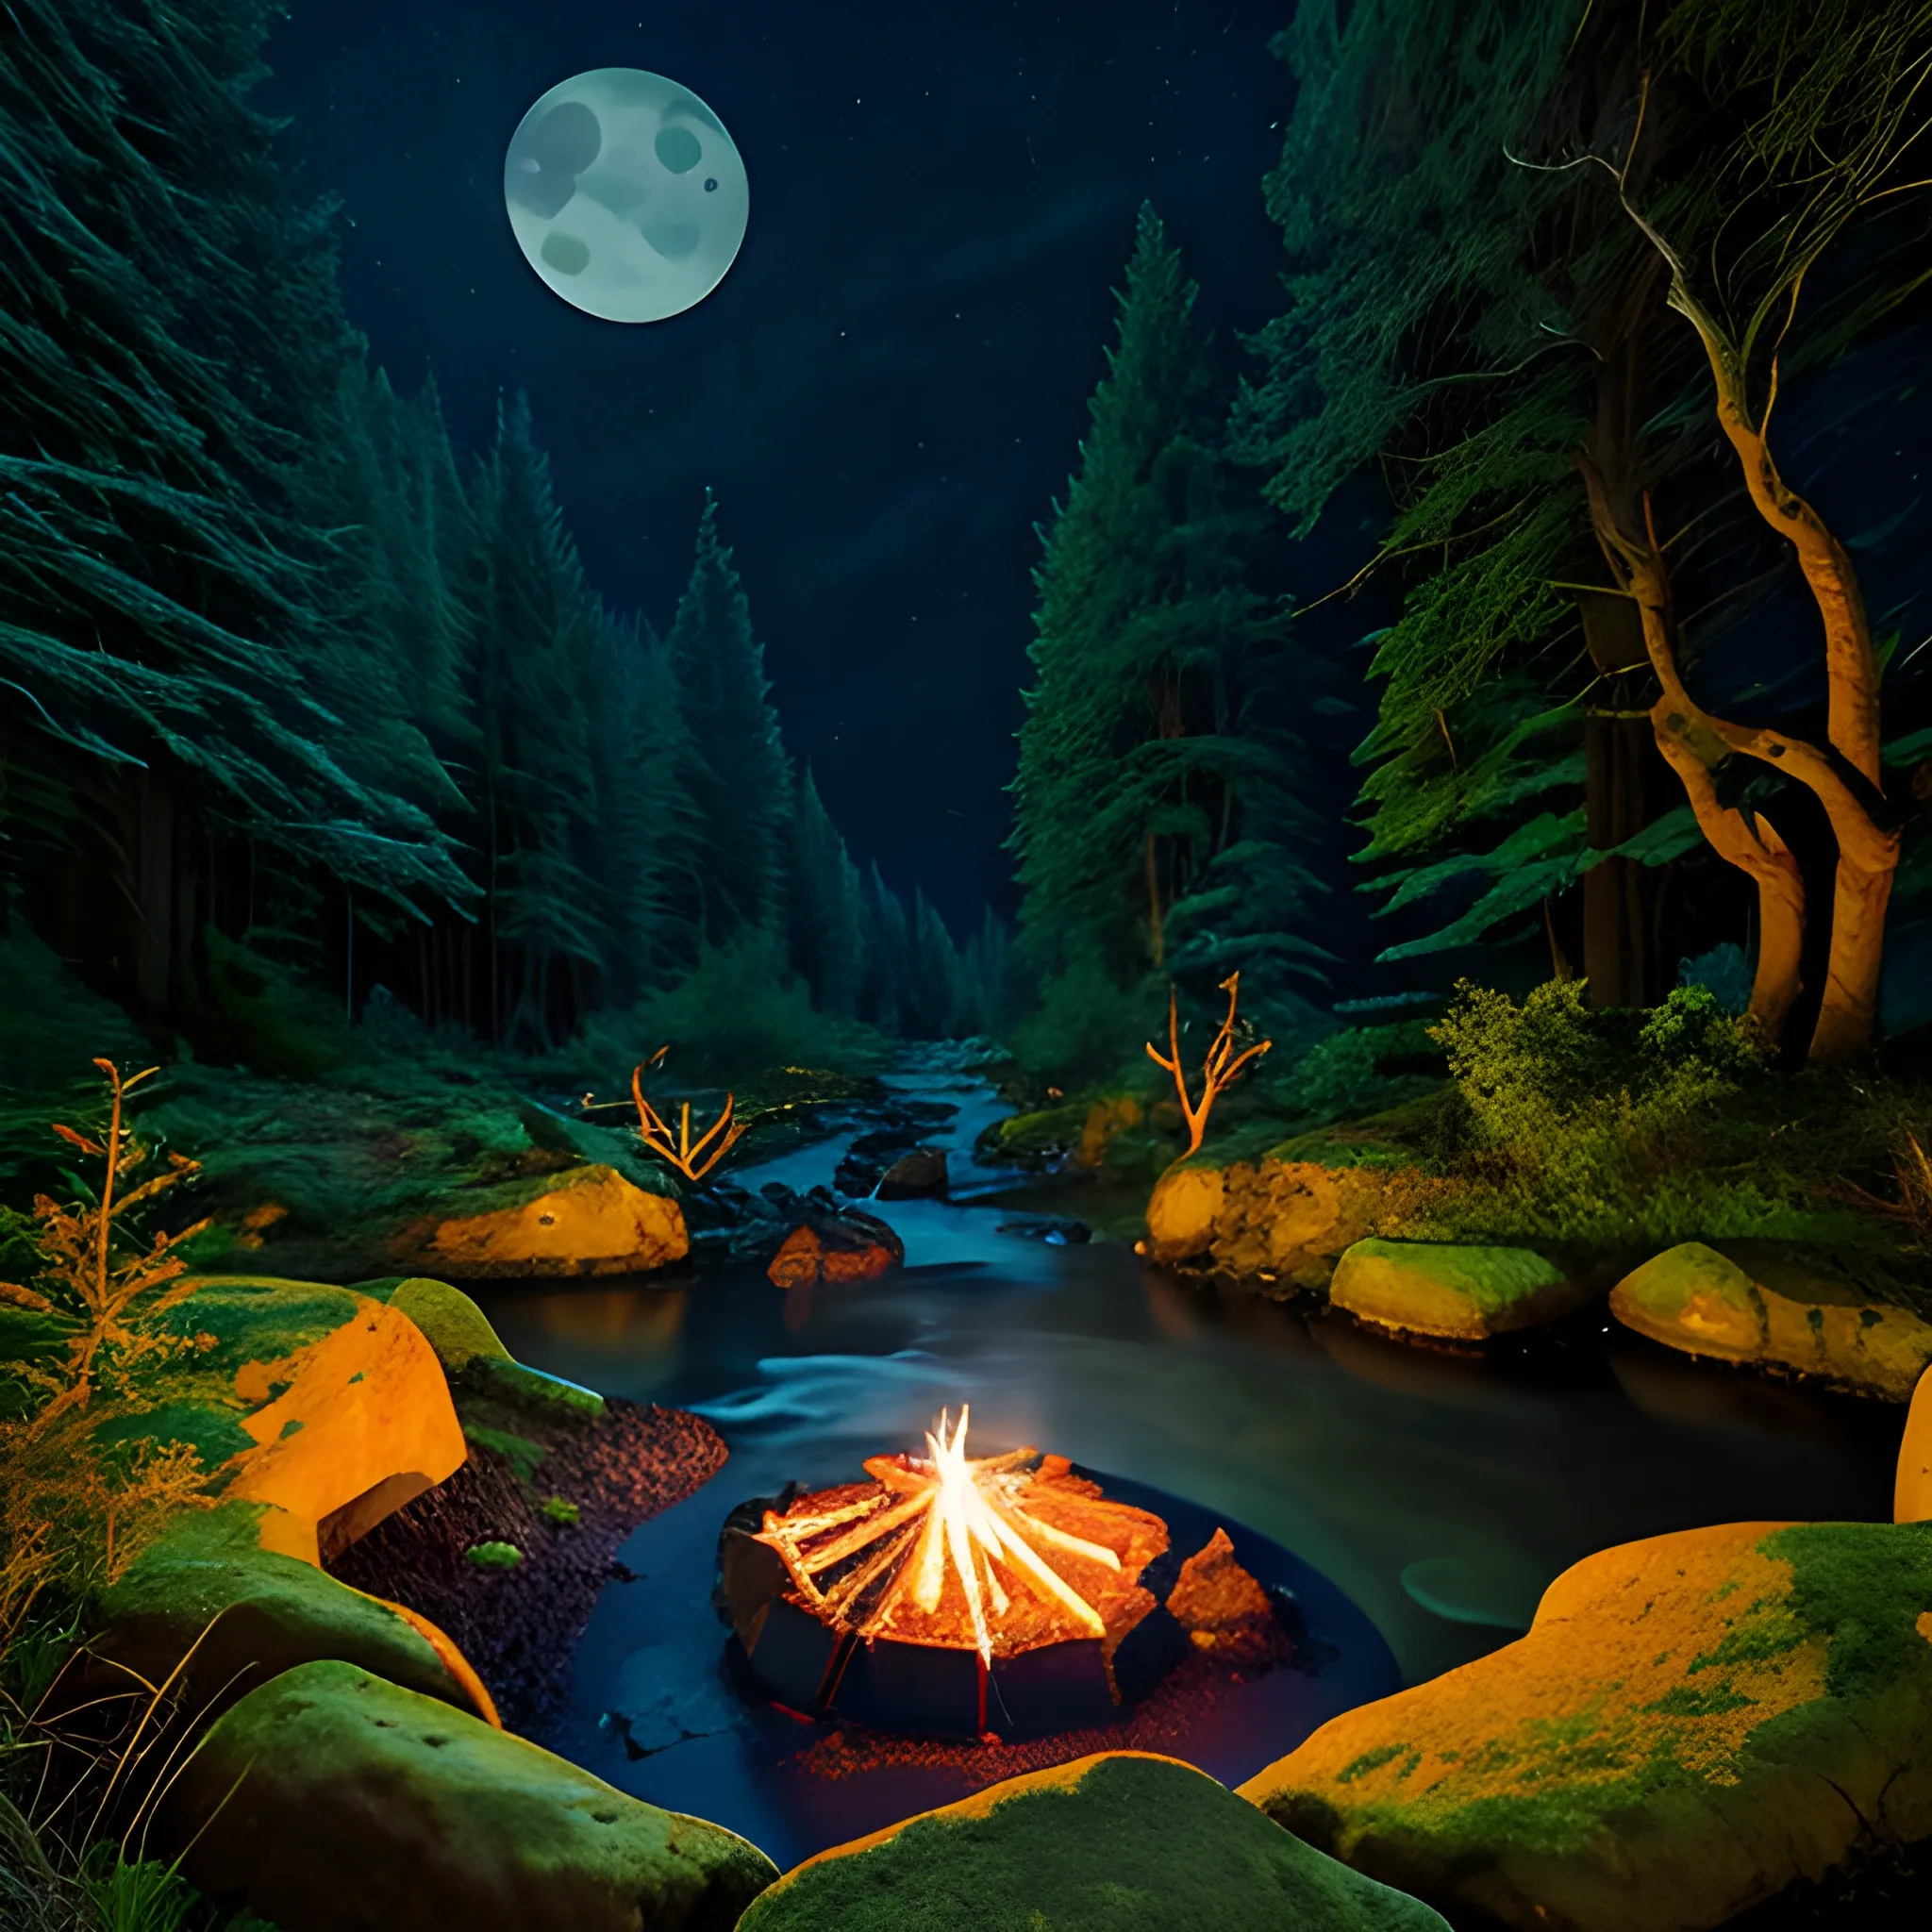 ancient elvish forest with a small stream and a clearing under moonlight and a small campfire